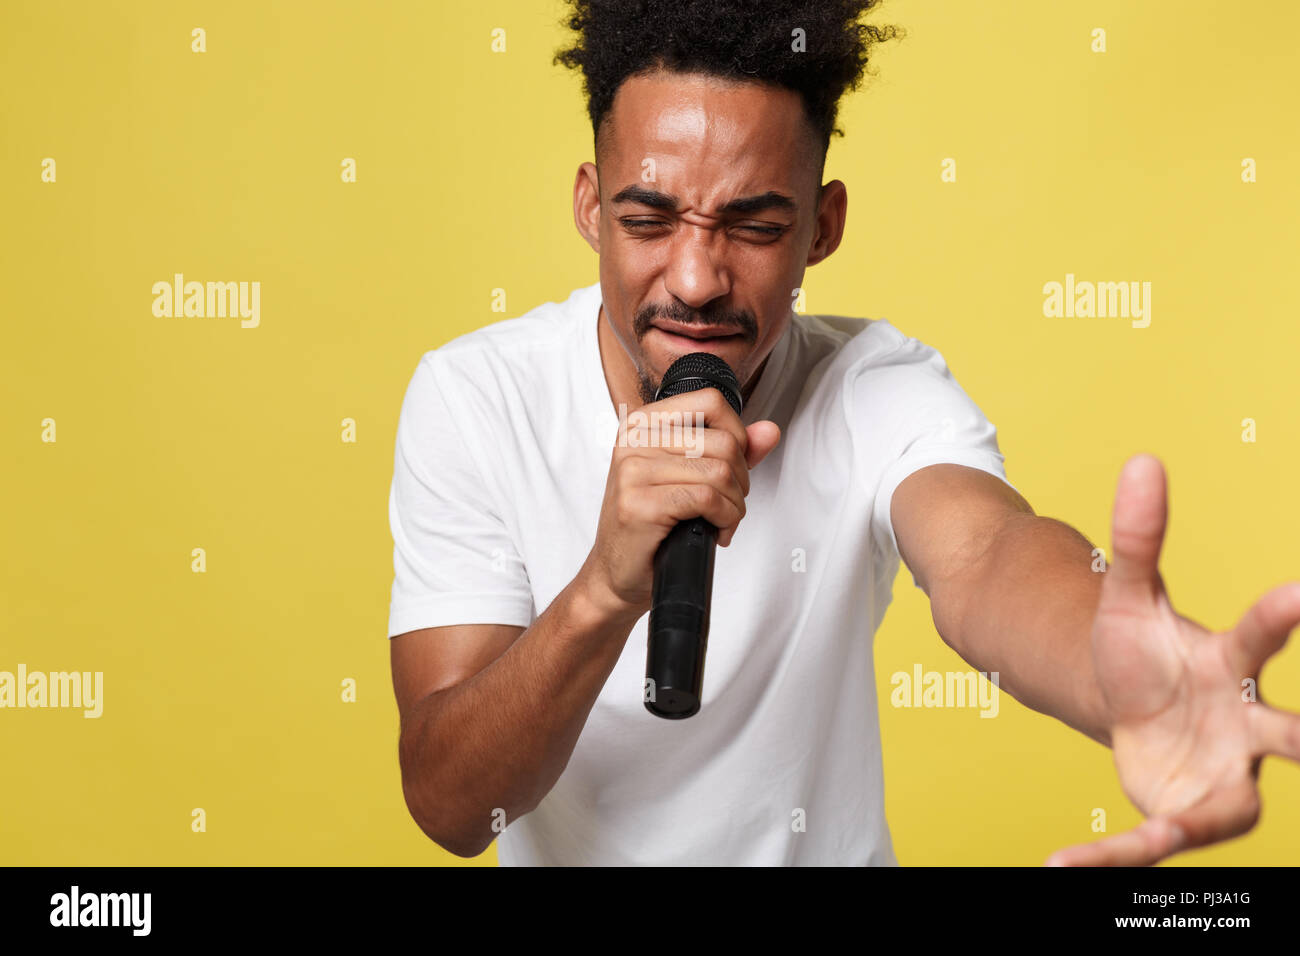 Stylish Afro American Man Singing Into Microphone Isolated On A Yellow